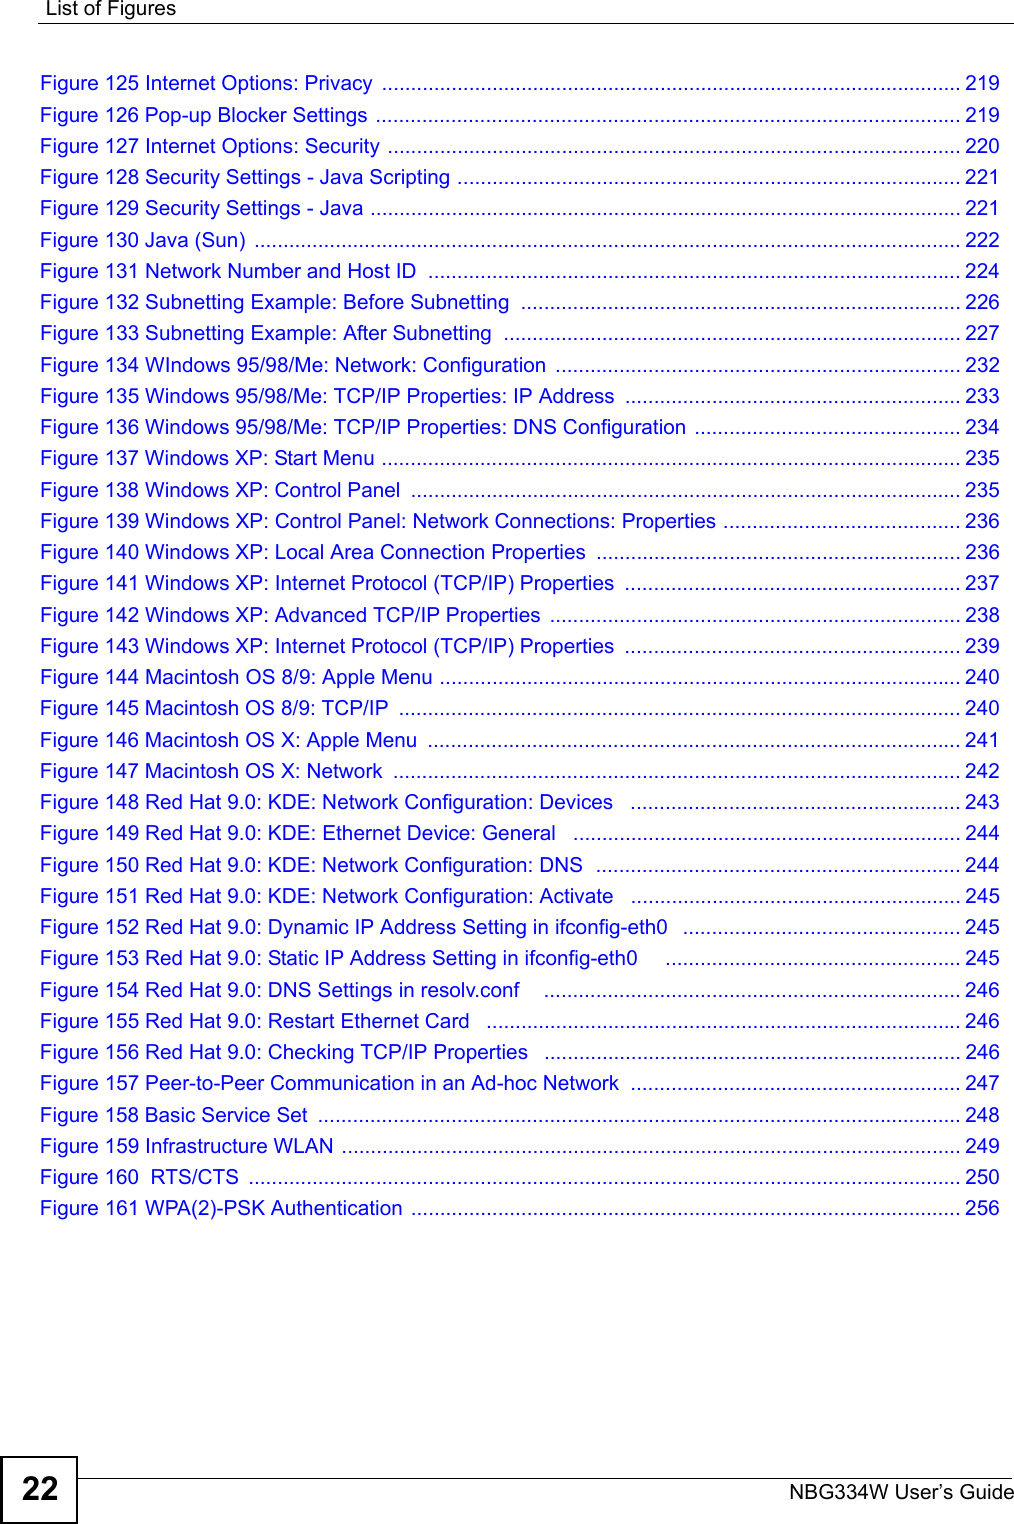 List of FiguresNBG334W User’s Guide22Figure 125 Internet Options: Privacy  .................................................................................................... 219Figure 126 Pop-up Blocker Settings ..................................................................................................... 219Figure 127 Internet Options: Security ................................................................................................... 220Figure 128 Security Settings - Java Scripting ....................................................................................... 221Figure 129 Security Settings - Java ...................................................................................................... 221Figure 130 Java (Sun)  .......................................................................................................................... 222Figure 131 Network Number and Host ID  ............................................................................................ 224Figure 132 Subnetting Example: Before Subnetting  ............................................................................ 226Figure 133 Subnetting Example: After Subnetting  ............................................................................... 227Figure 134 WIndows 95/98/Me: Network: Configuration  ...................................................................... 232Figure 135 Windows 95/98/Me: TCP/IP Properties: IP Address  .......................................................... 233Figure 136 Windows 95/98/Me: TCP/IP Properties: DNS Configuration .............................................. 234Figure 137 Windows XP: Start Menu .................................................................................................... 235Figure 138 Windows XP: Control Panel  ............................................................................................... 235Figure 139 Windows XP: Control Panel: Network Connections: Properties ......................................... 236Figure 140 Windows XP: Local Area Connection Properties ............................................................... 236Figure 141 Windows XP: Internet Protocol (TCP/IP) Properties  .......................................................... 237Figure 142 Windows XP: Advanced TCP/IP Properties  ....................................................................... 238Figure 143 Windows XP: Internet Protocol (TCP/IP) Properties  .......................................................... 239Figure 144 Macintosh OS 8/9: Apple Menu .......................................................................................... 240Figure 145 Macintosh OS 8/9: TCP/IP  ................................................................................................. 240Figure 146 Macintosh OS X: Apple Menu  ............................................................................................ 241Figure 147 Macintosh OS X: Network  .................................................................................................. 242Figure 148 Red Hat 9.0: KDE: Network Configuration: Devices   ......................................................... 243Figure 149 Red Hat 9.0: KDE: Ethernet Device: General   ................................................................... 244Figure 150 Red Hat 9.0: KDE: Network Configuration: DNS  ............................................................... 244Figure 151 Red Hat 9.0: KDE: Network Configuration: Activate   ......................................................... 245Figure 152 Red Hat 9.0: Dynamic IP Address Setting in ifconfig-eth0   ................................................ 245Figure 153 Red Hat 9.0: Static IP Address Setting in ifconfig-eth0     ................................................... 245Figure 154 Red Hat 9.0: DNS Settings in resolv.conf    ........................................................................ 246Figure 155 Red Hat 9.0: Restart Ethernet Card   .................................................................................. 246Figure 156 Red Hat 9.0: Checking TCP/IP Properties   ........................................................................ 246Figure 157 Peer-to-Peer Communication in an Ad-hoc Network  ......................................................... 247Figure 158 Basic Service Set  ............................................................................................................... 248Figure 159 Infrastructure WLAN ........................................................................................................... 249Figure 160  RTS/CTS  ........................................................................................................................... 250Figure 161 WPA(2)-PSK Authentication ............................................................................................... 256